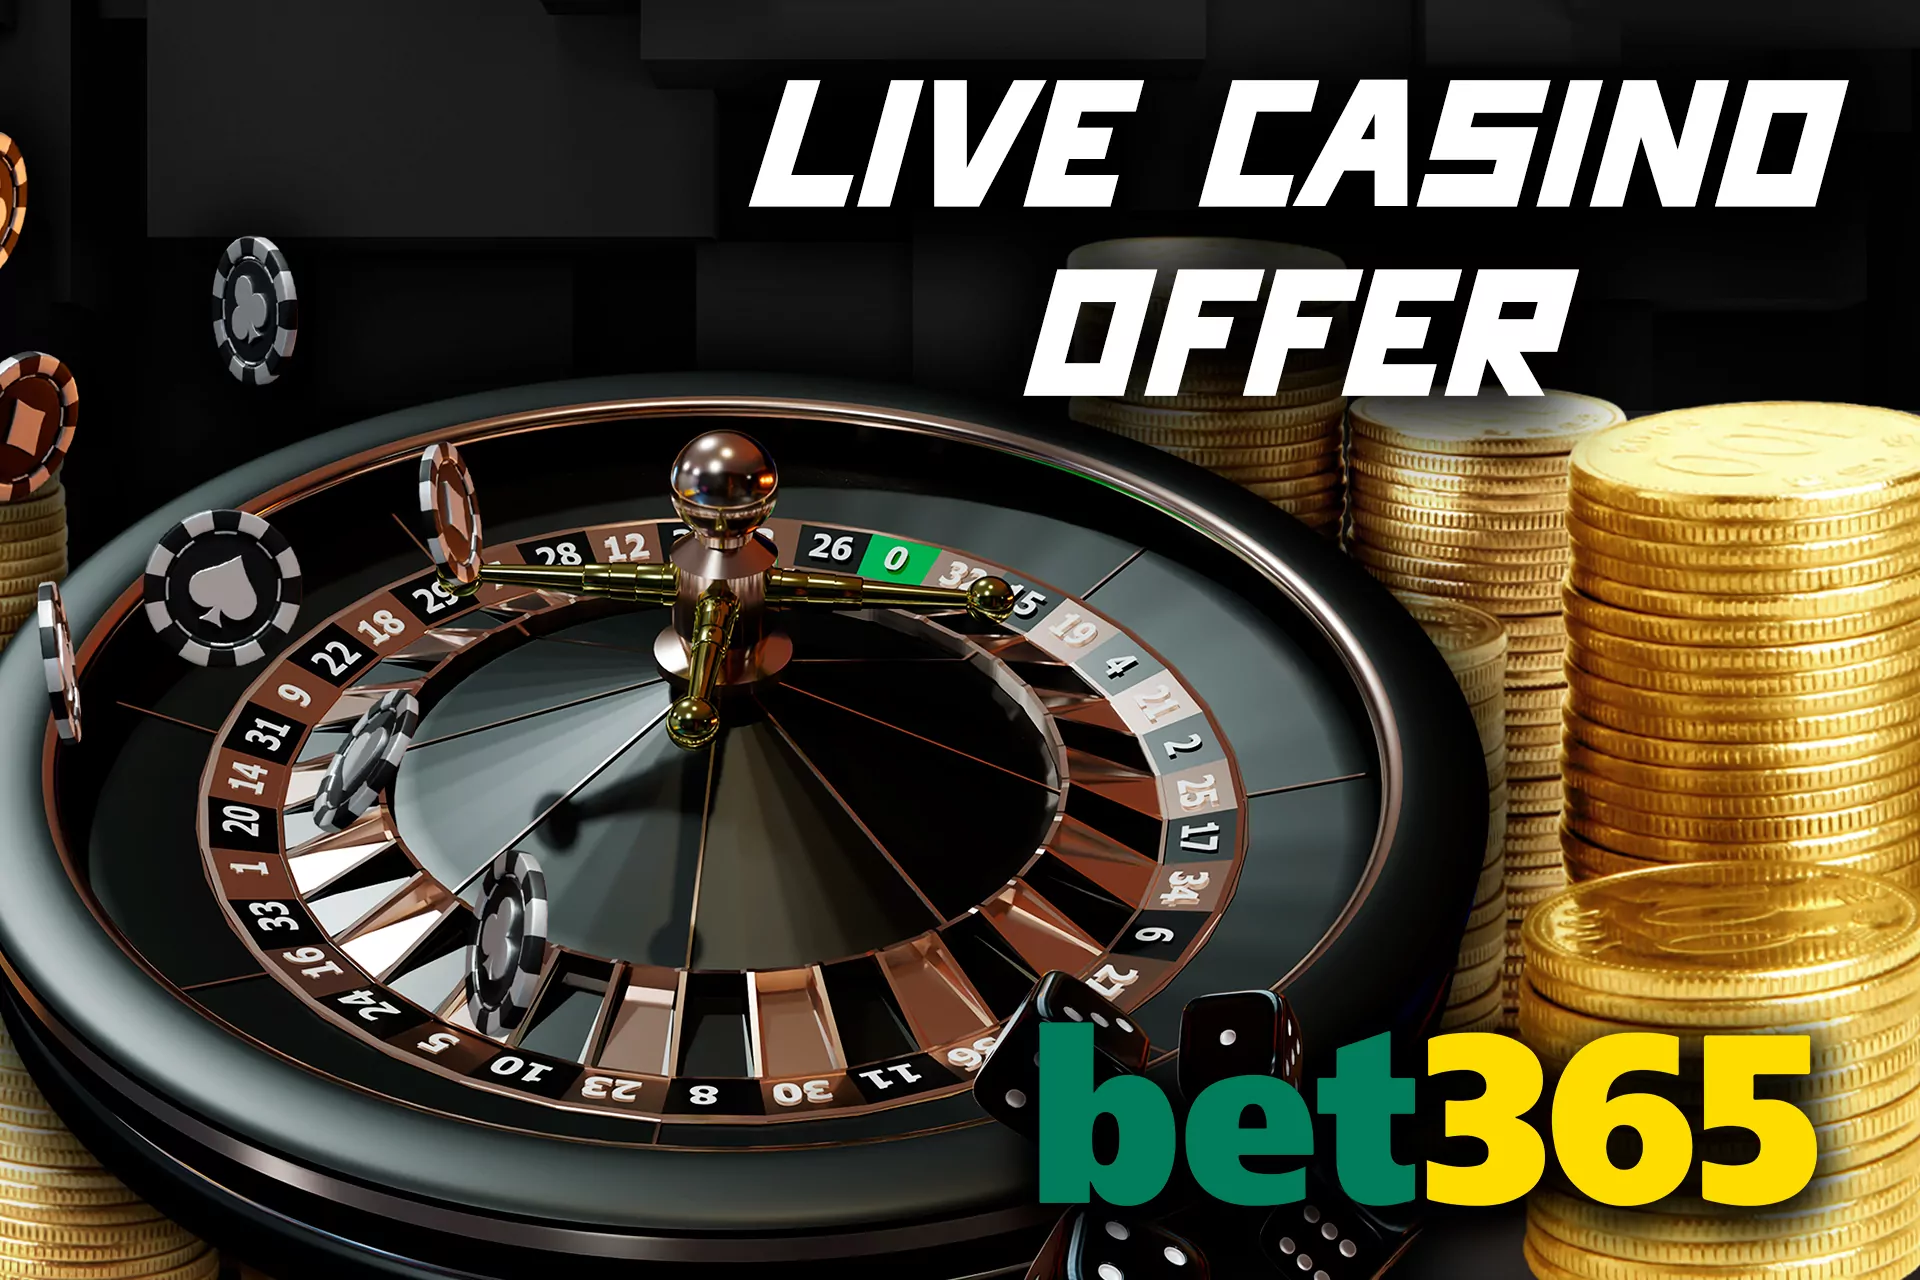 For casino players, there is a unique bonus offer on playing bet365 Live Casino games.